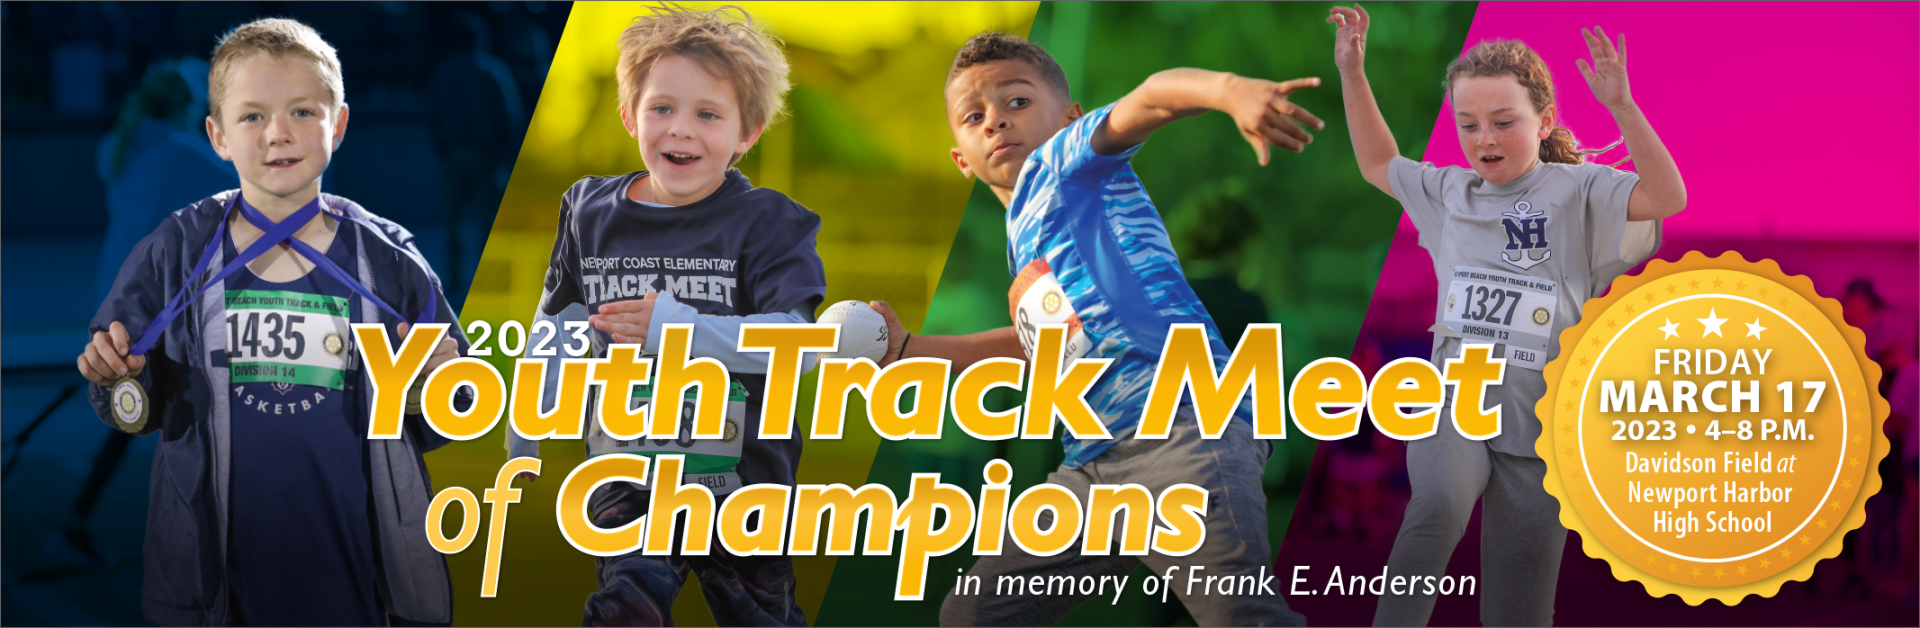 Youth Track Meet of Champions